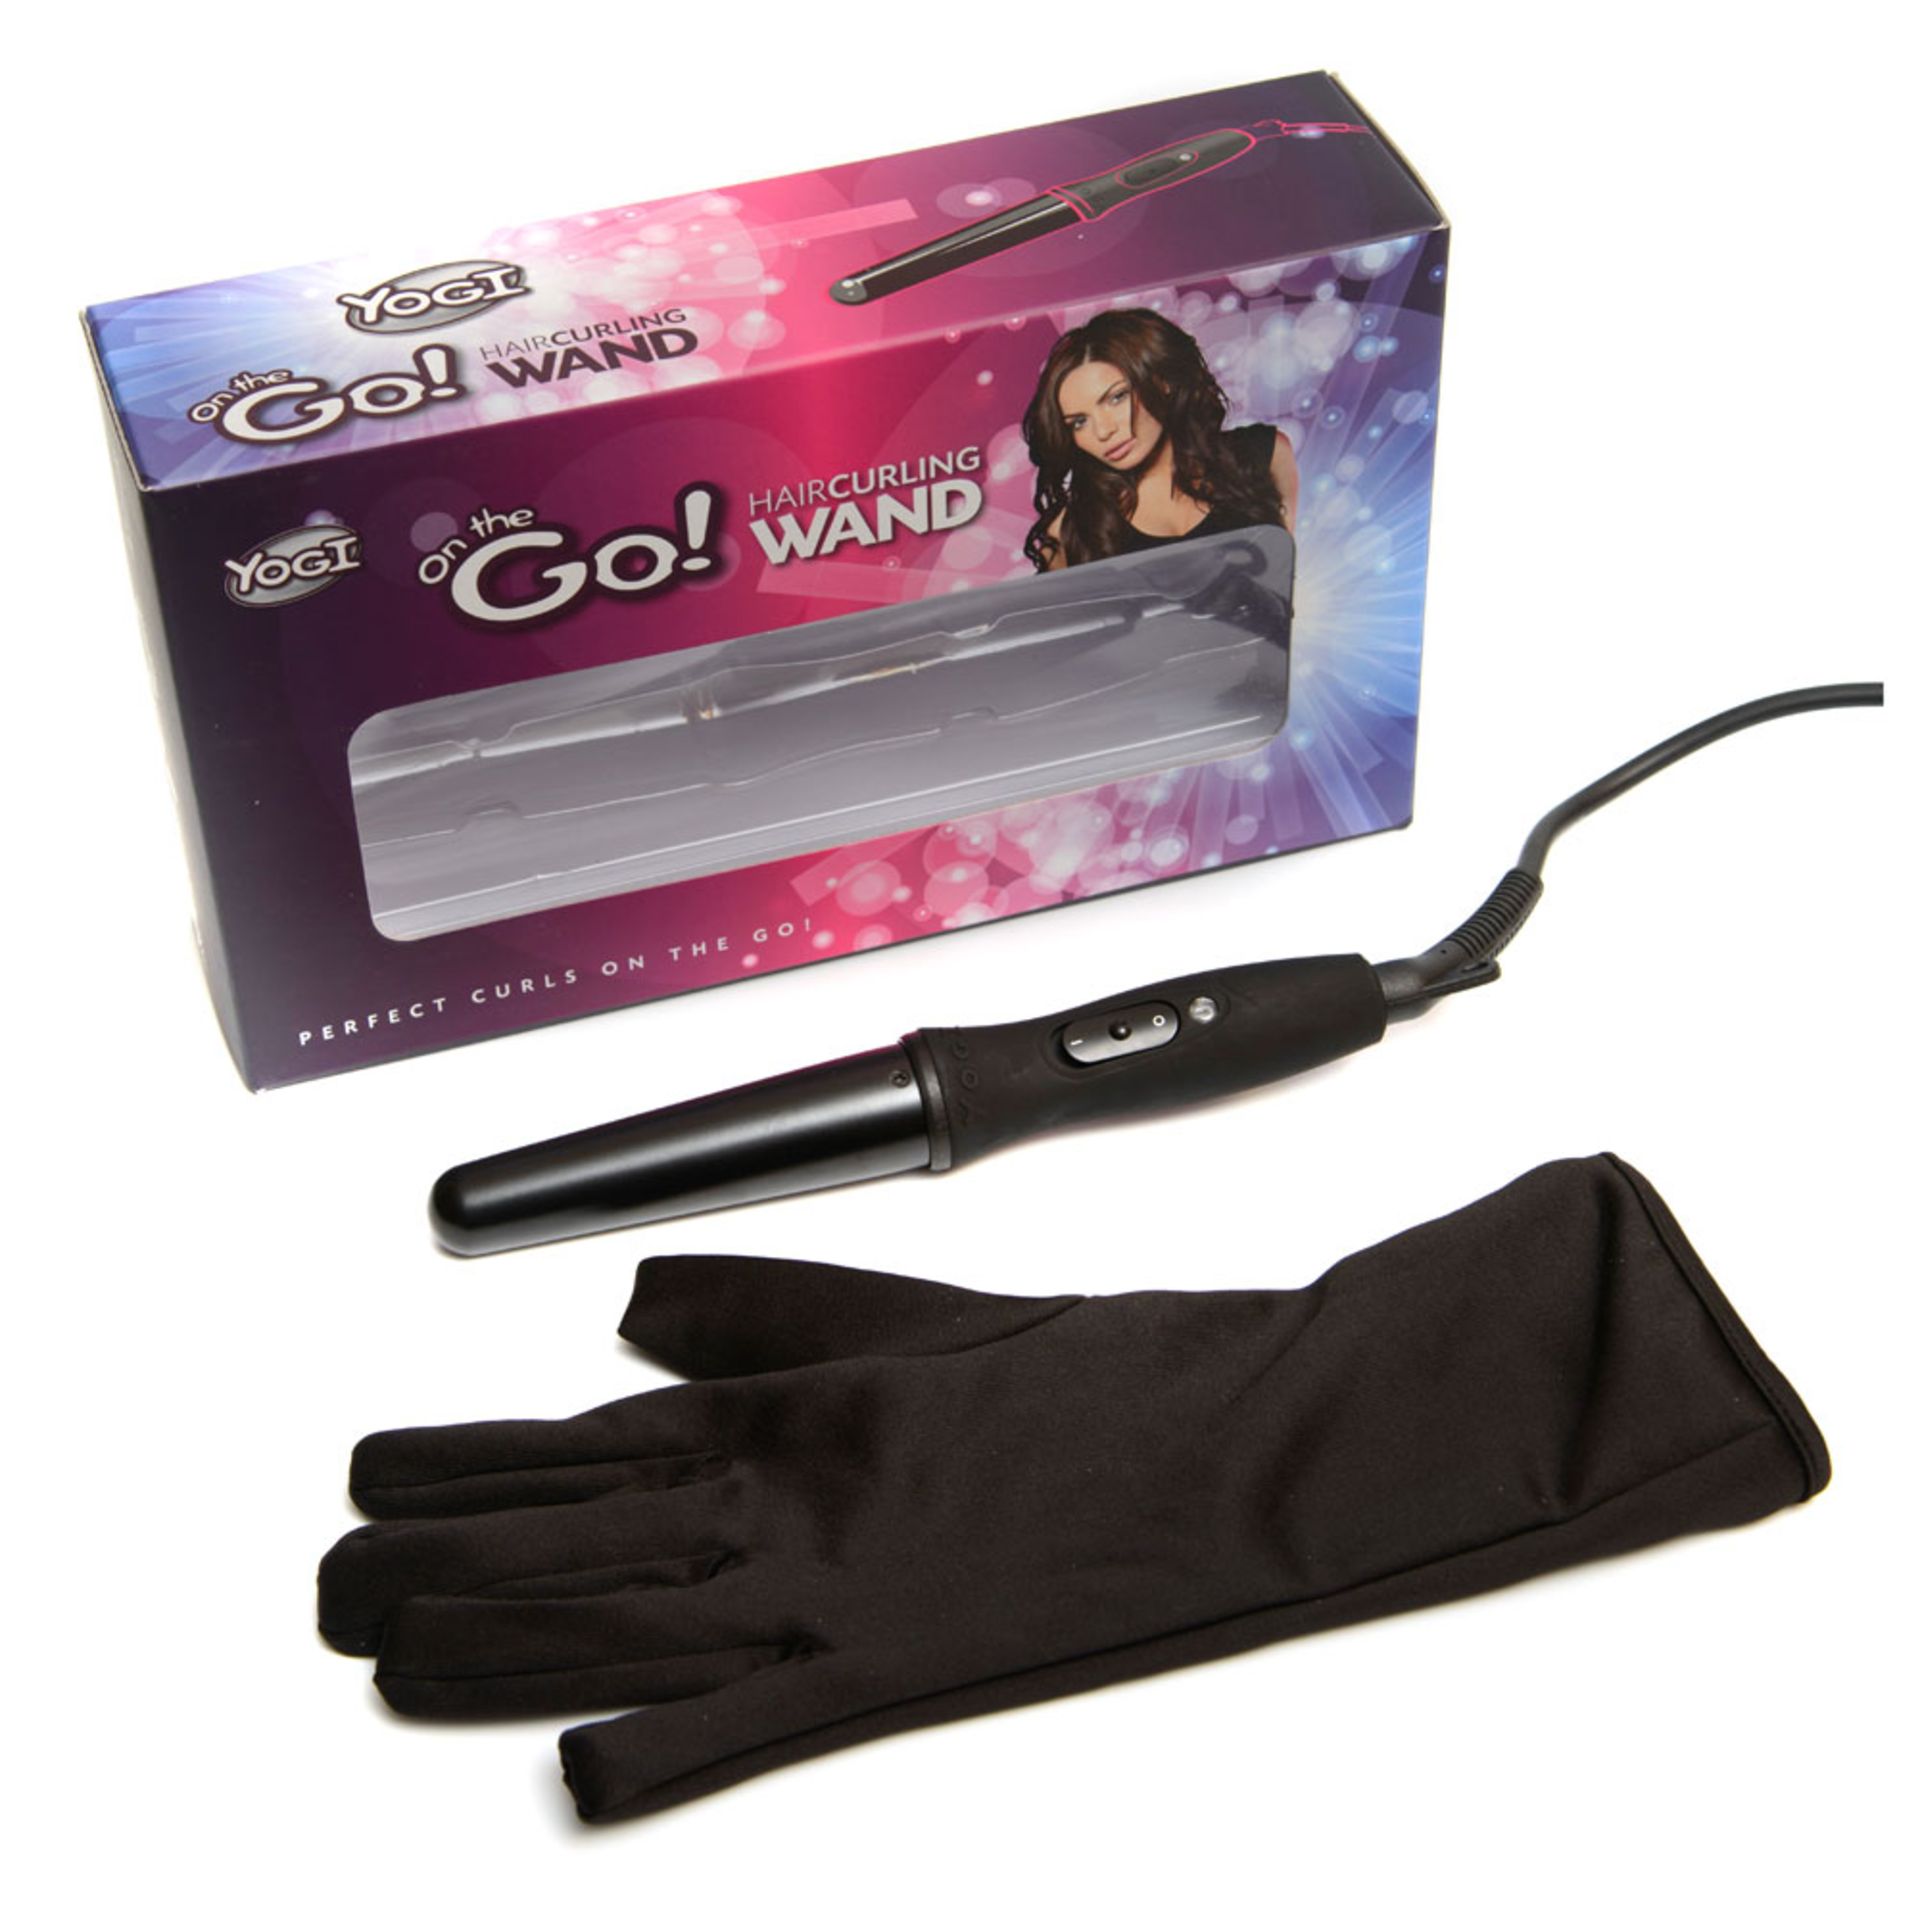 V Brand New Yogi On-The-Go! Hair Curling Wand With Safety Glove - Tourmaline & Ceramic Barrel RRP £